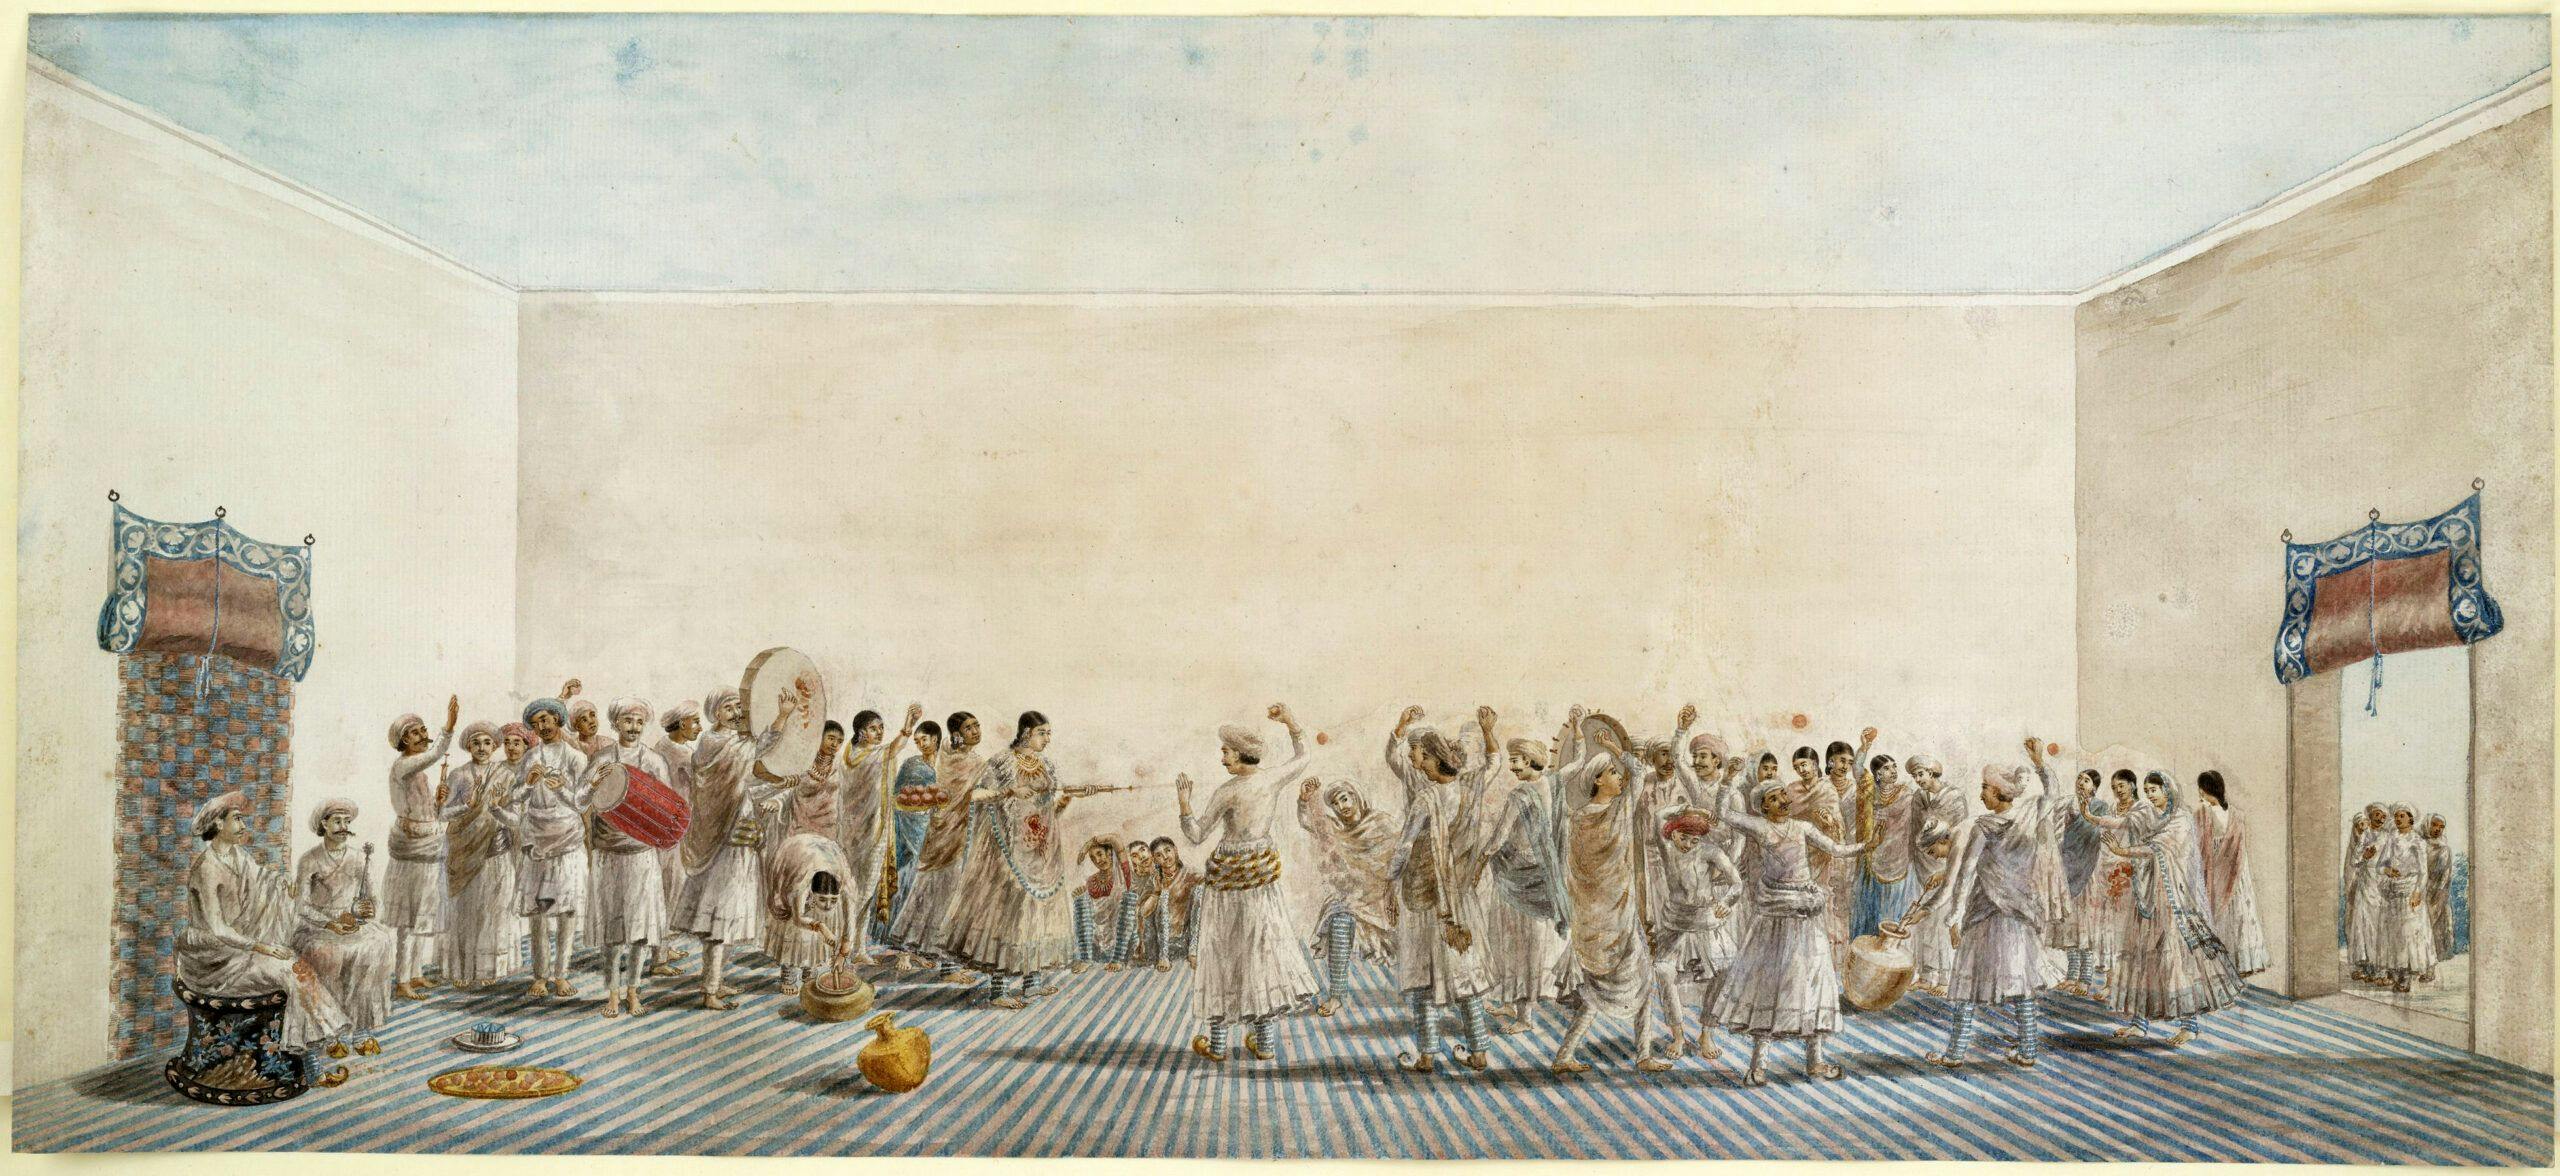 Holi being played in the courtyard, c.1795